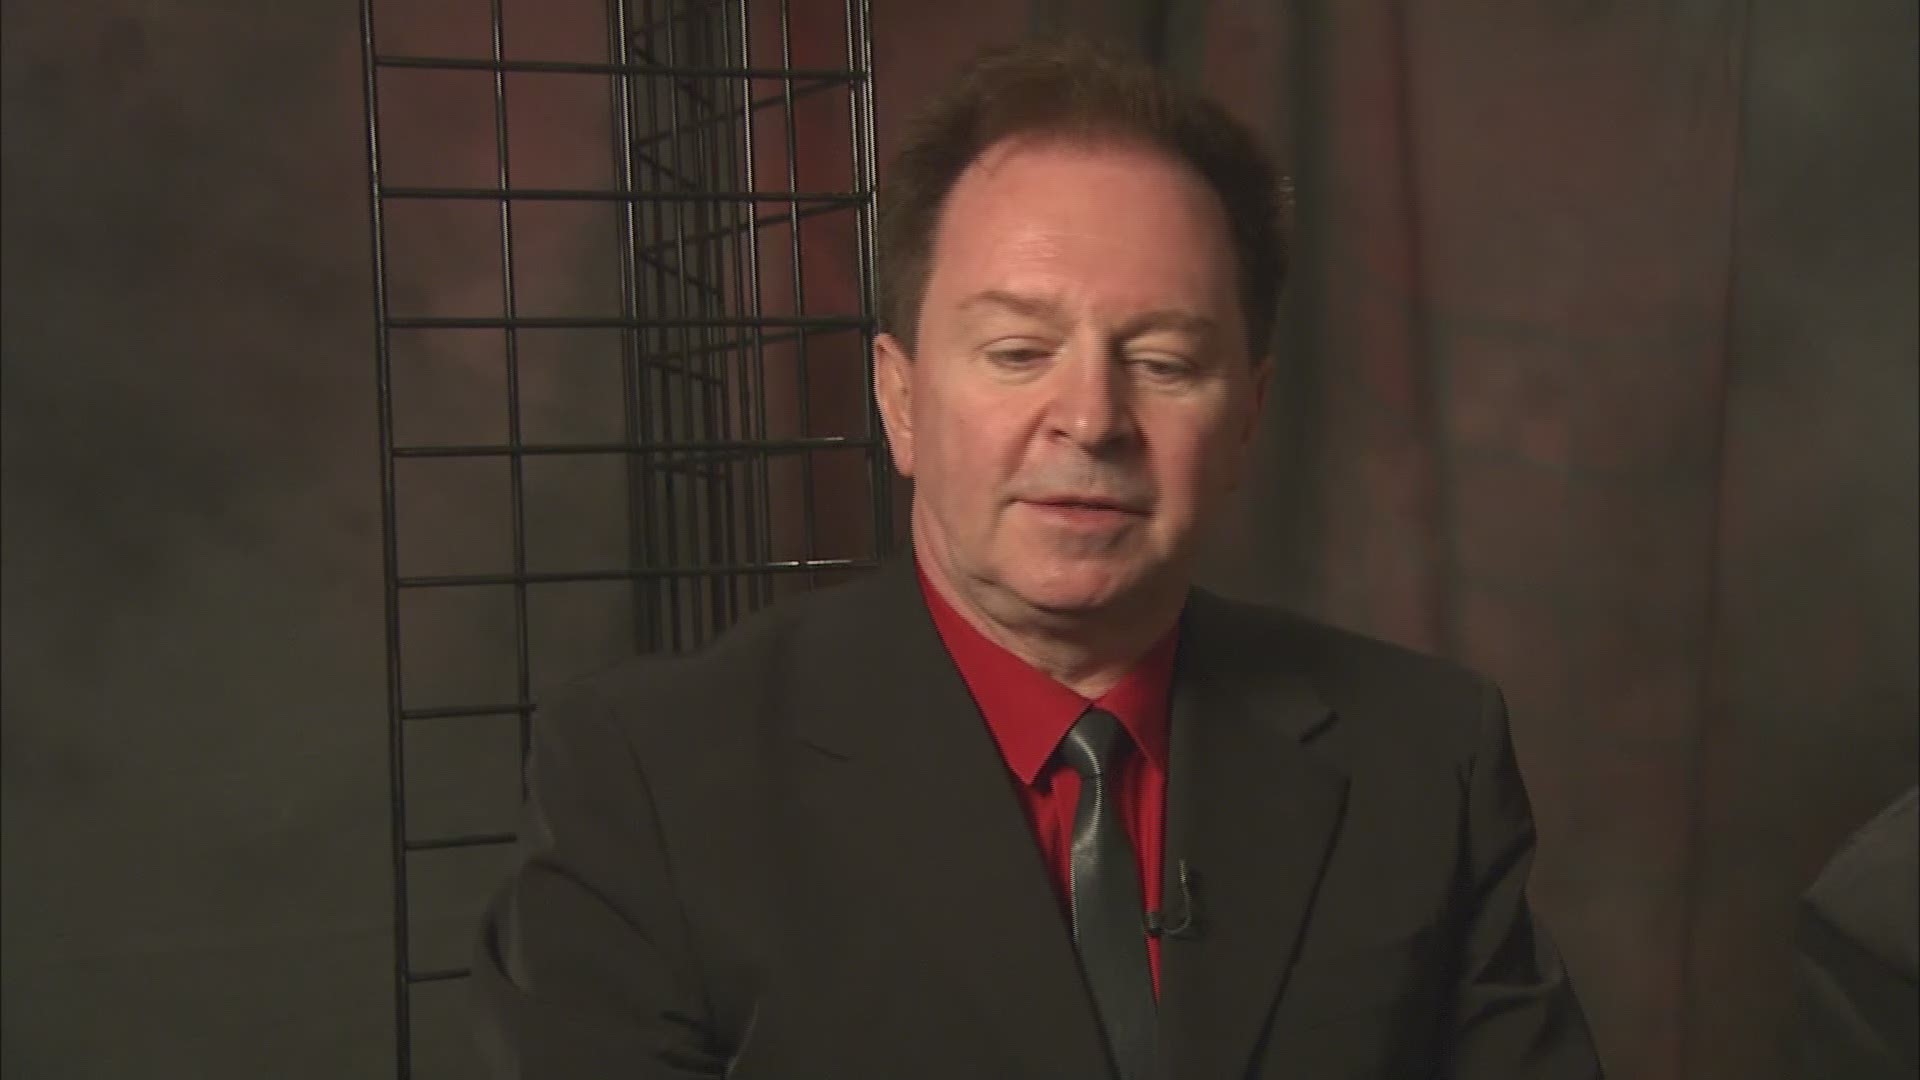 Here is archive footage from a previous WKYC interview where Devo tells us how they got their start. For the first time, Devo has been nominated for induction into the Rock and Roll Hall of Fame in 2019.